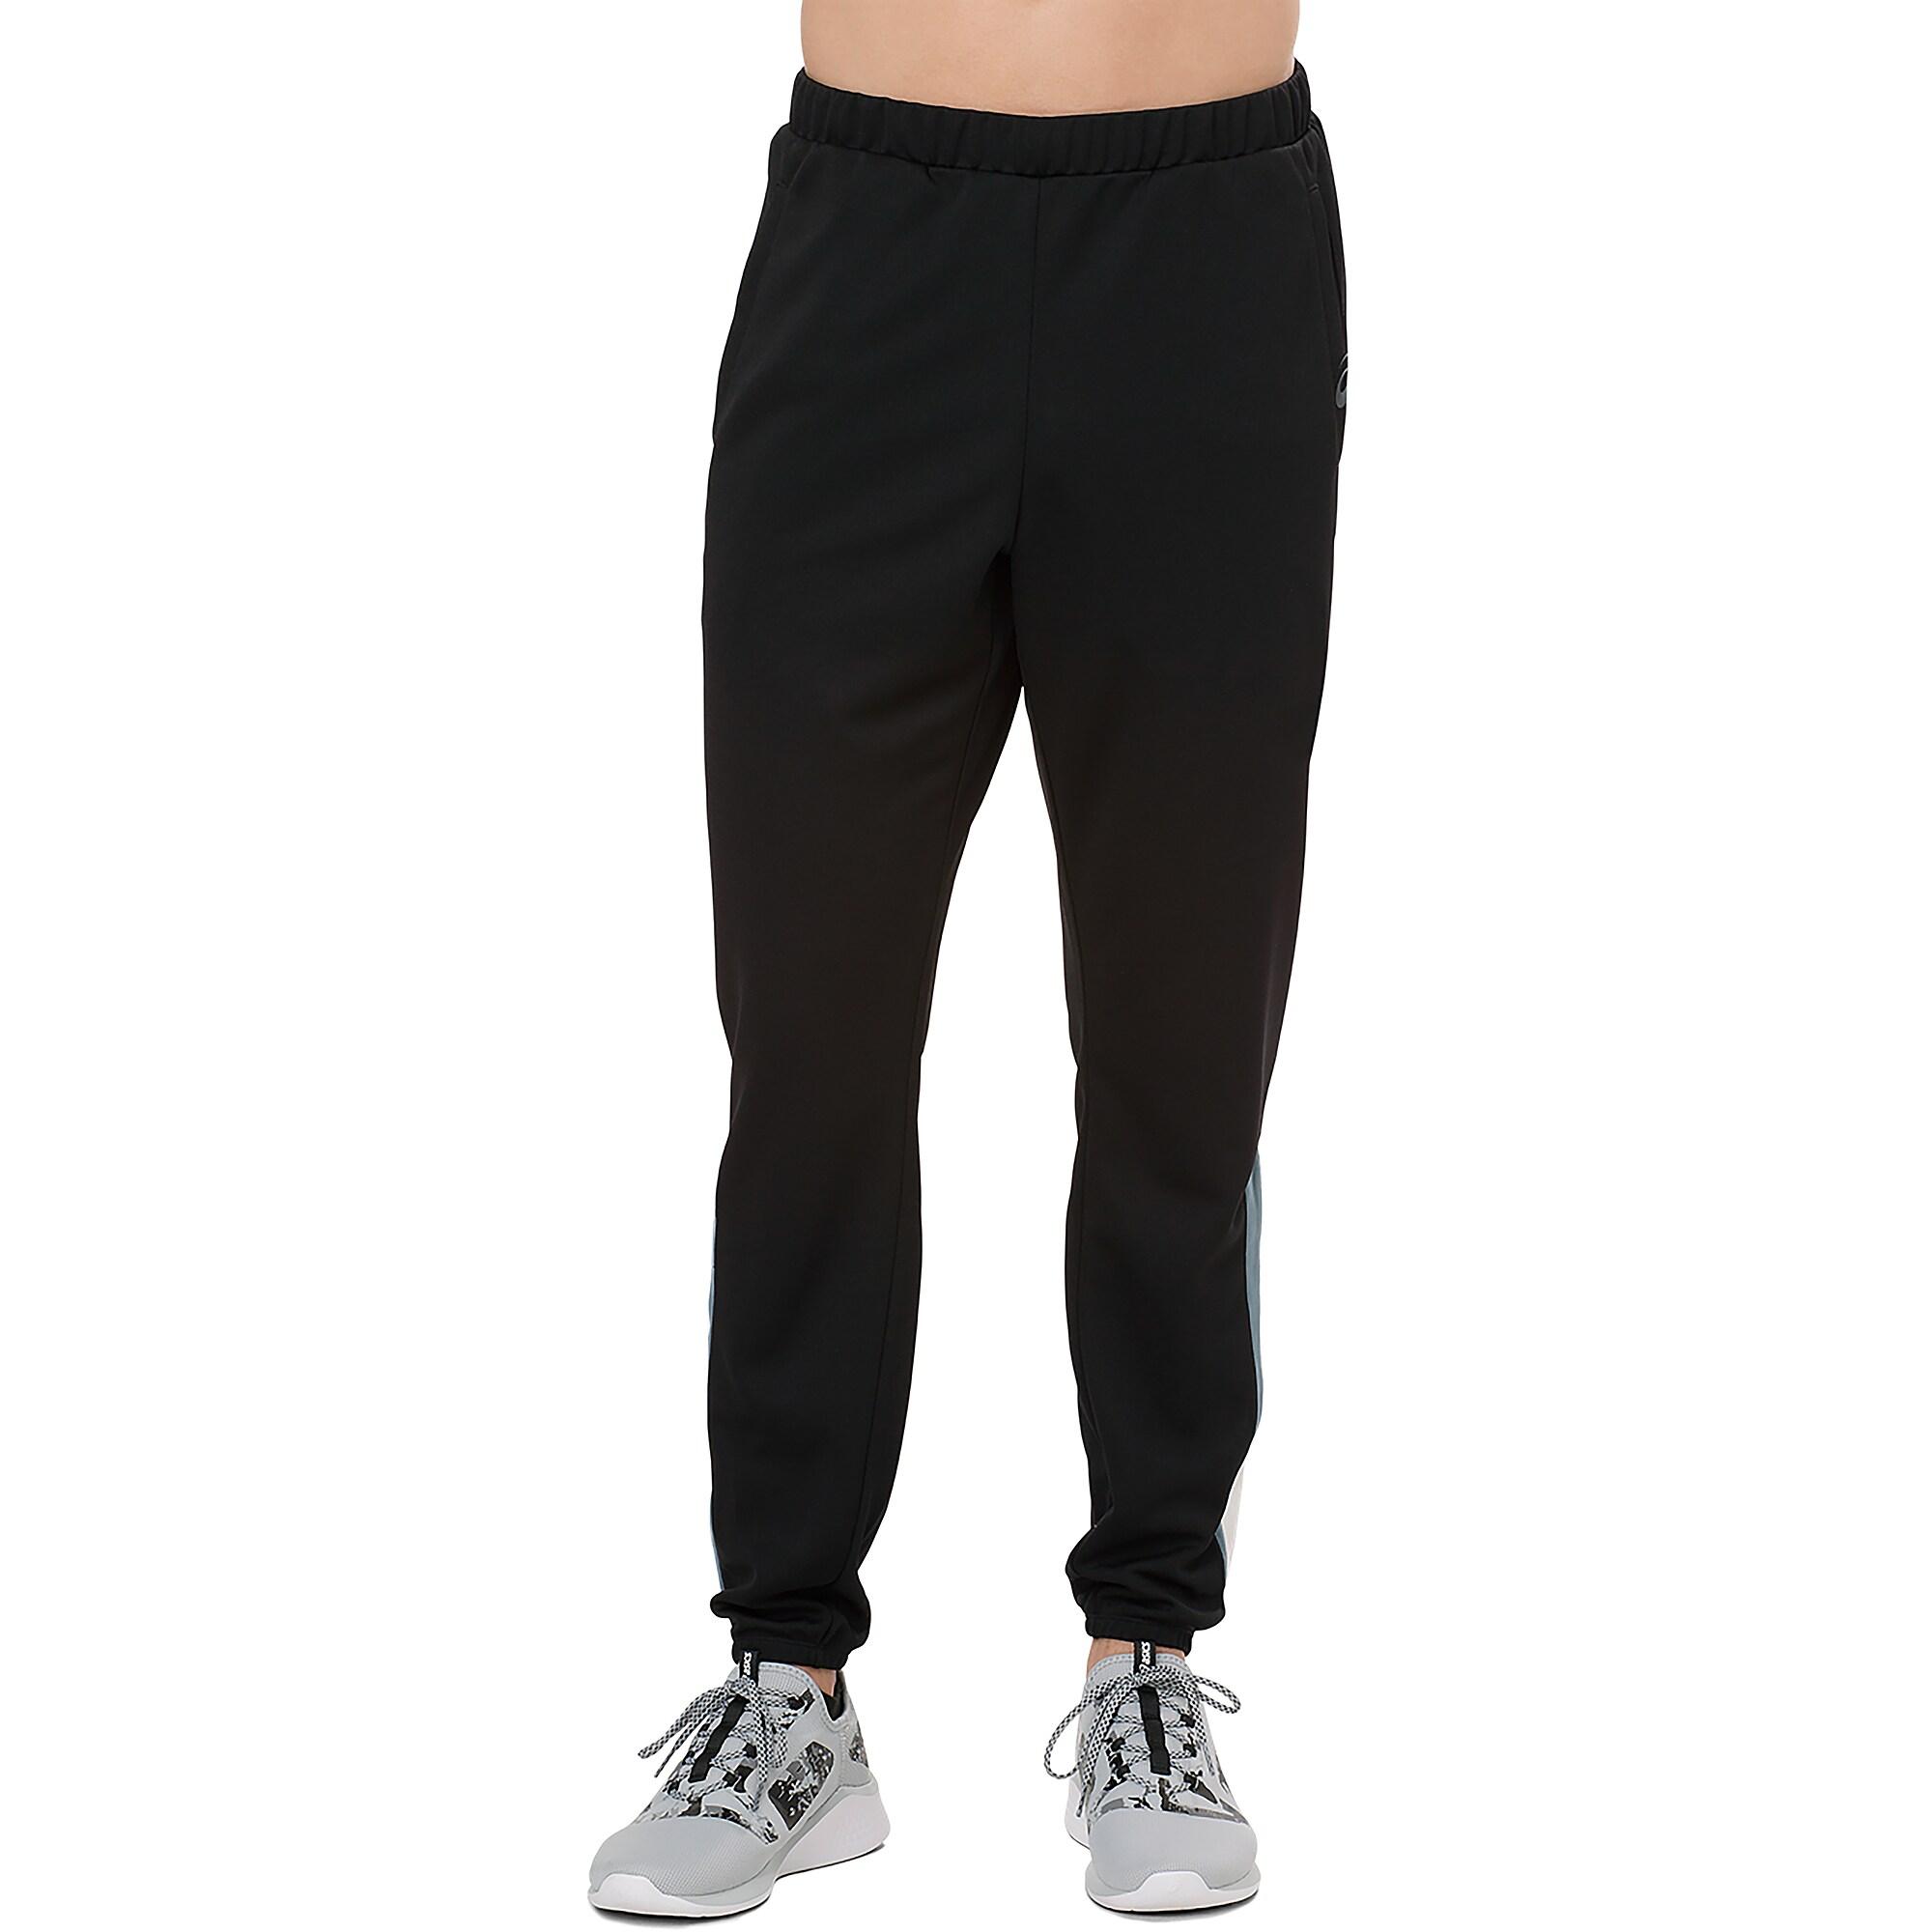 Asics Cuff Track Pants in Black for Men - Lyst